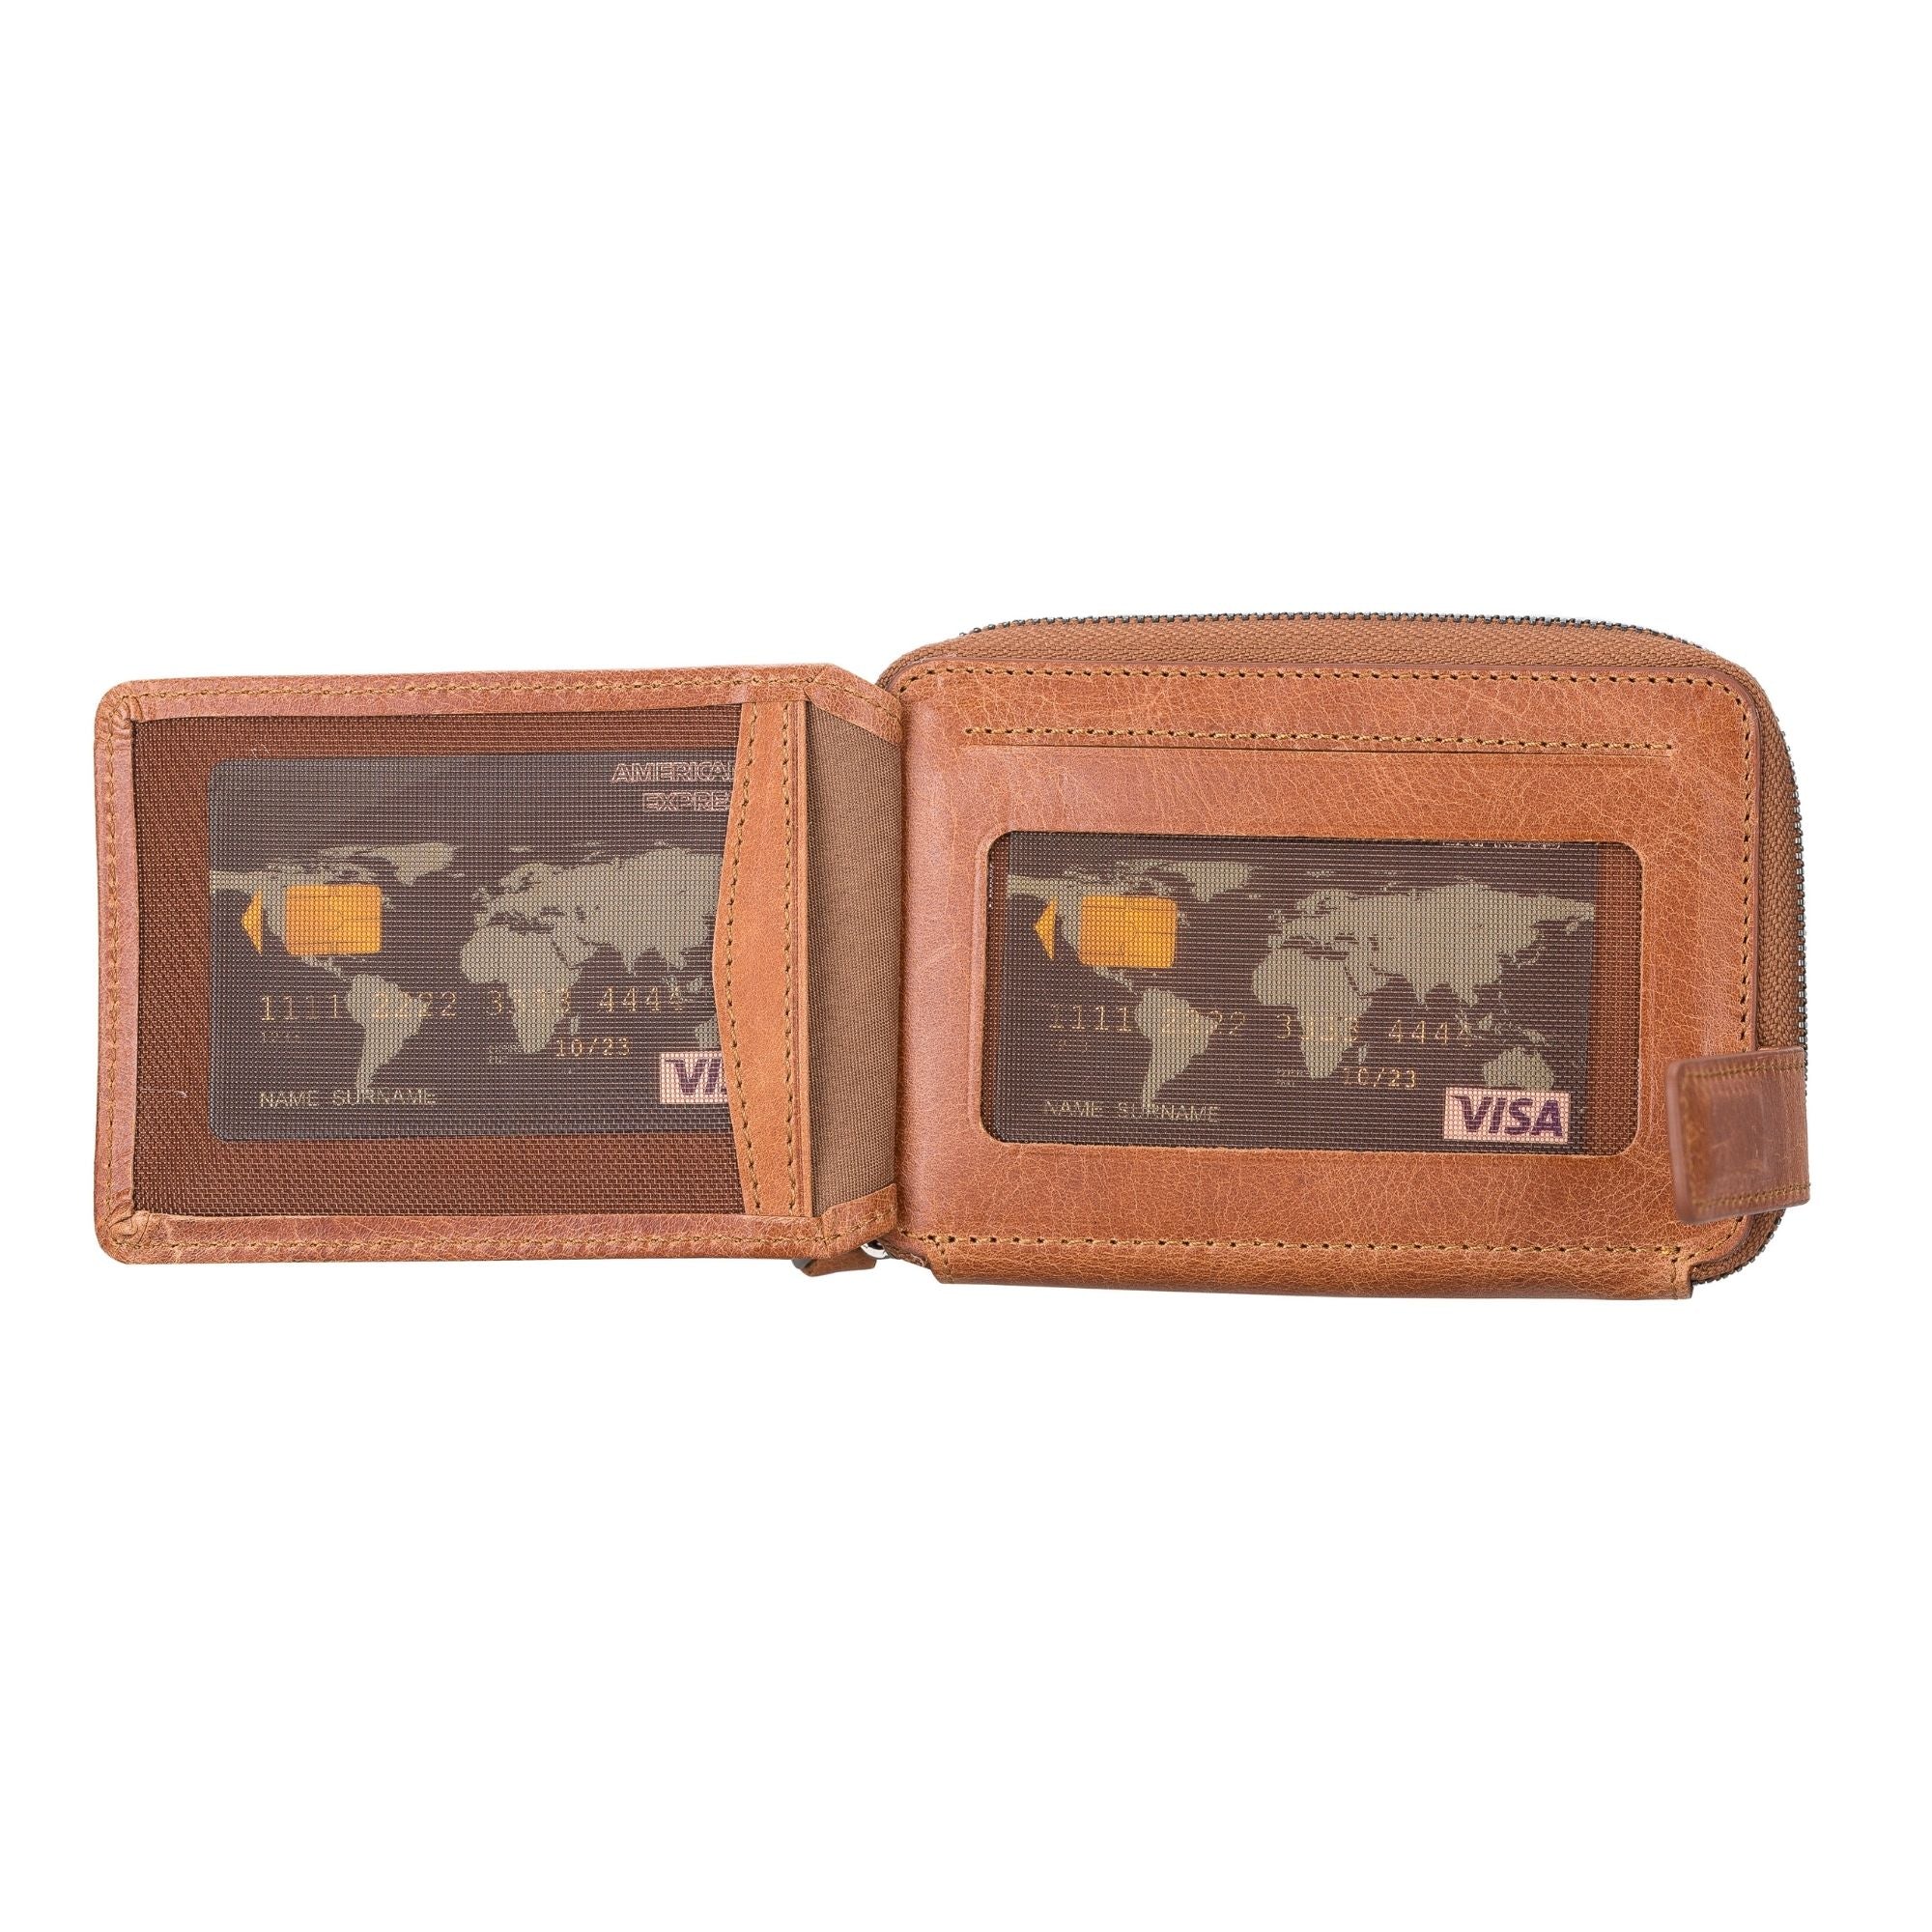 Powell Handmade Unisex Leather Wallet with Zippered Compartment - Dark Brown - TORONATA